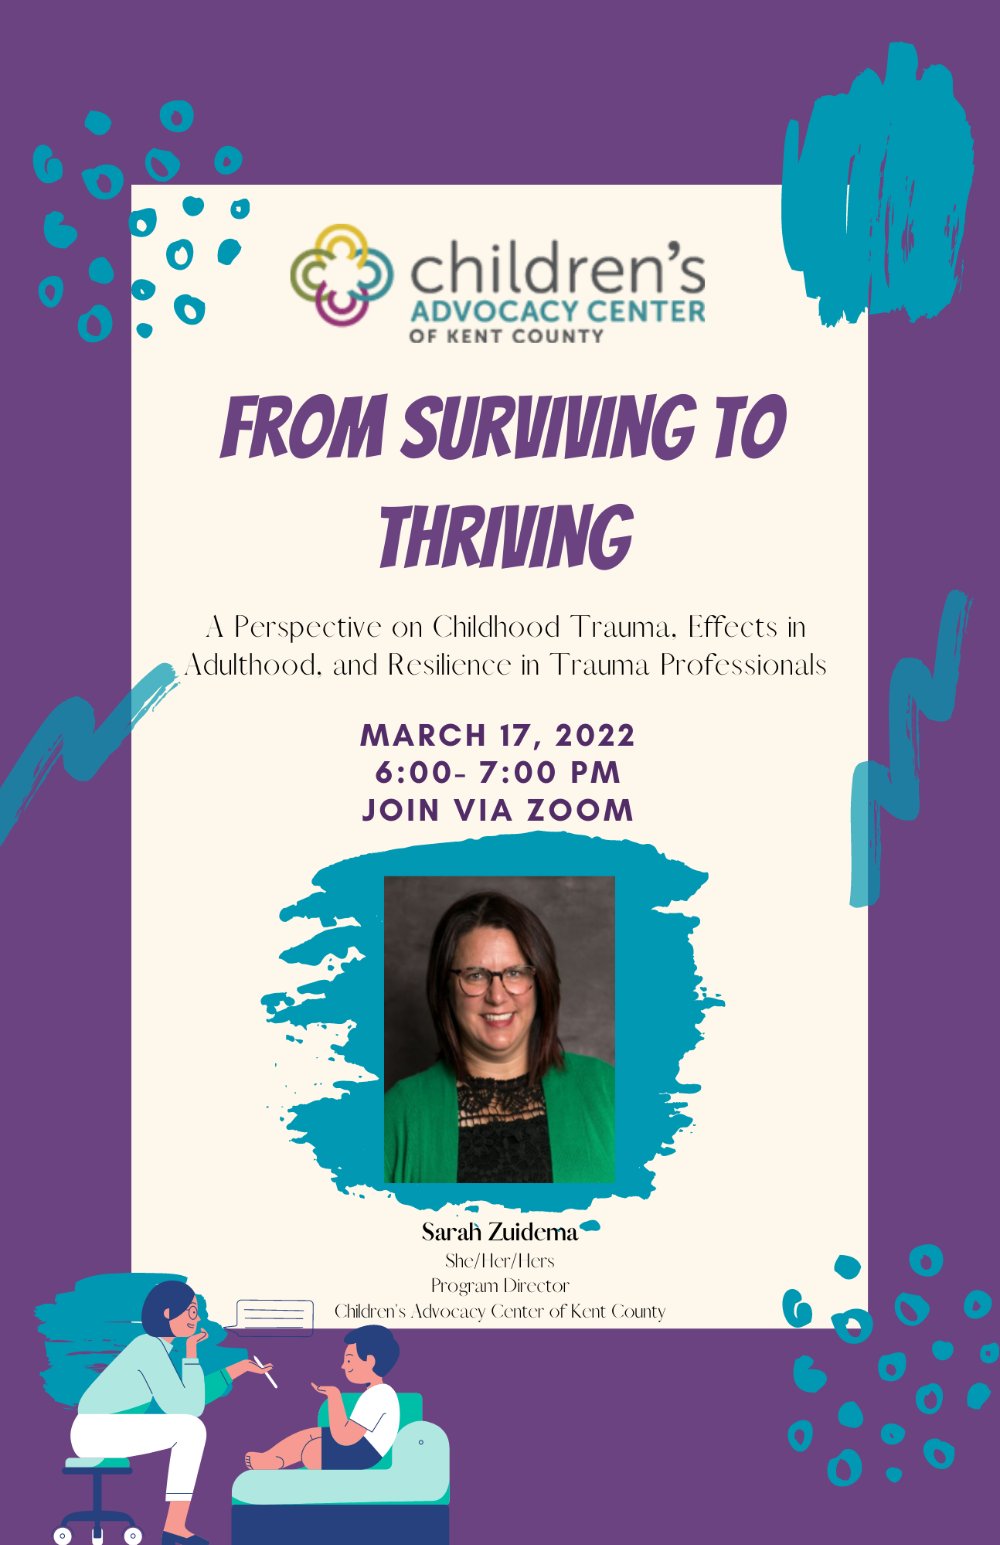 From Surviving to Thriving Event Flyer